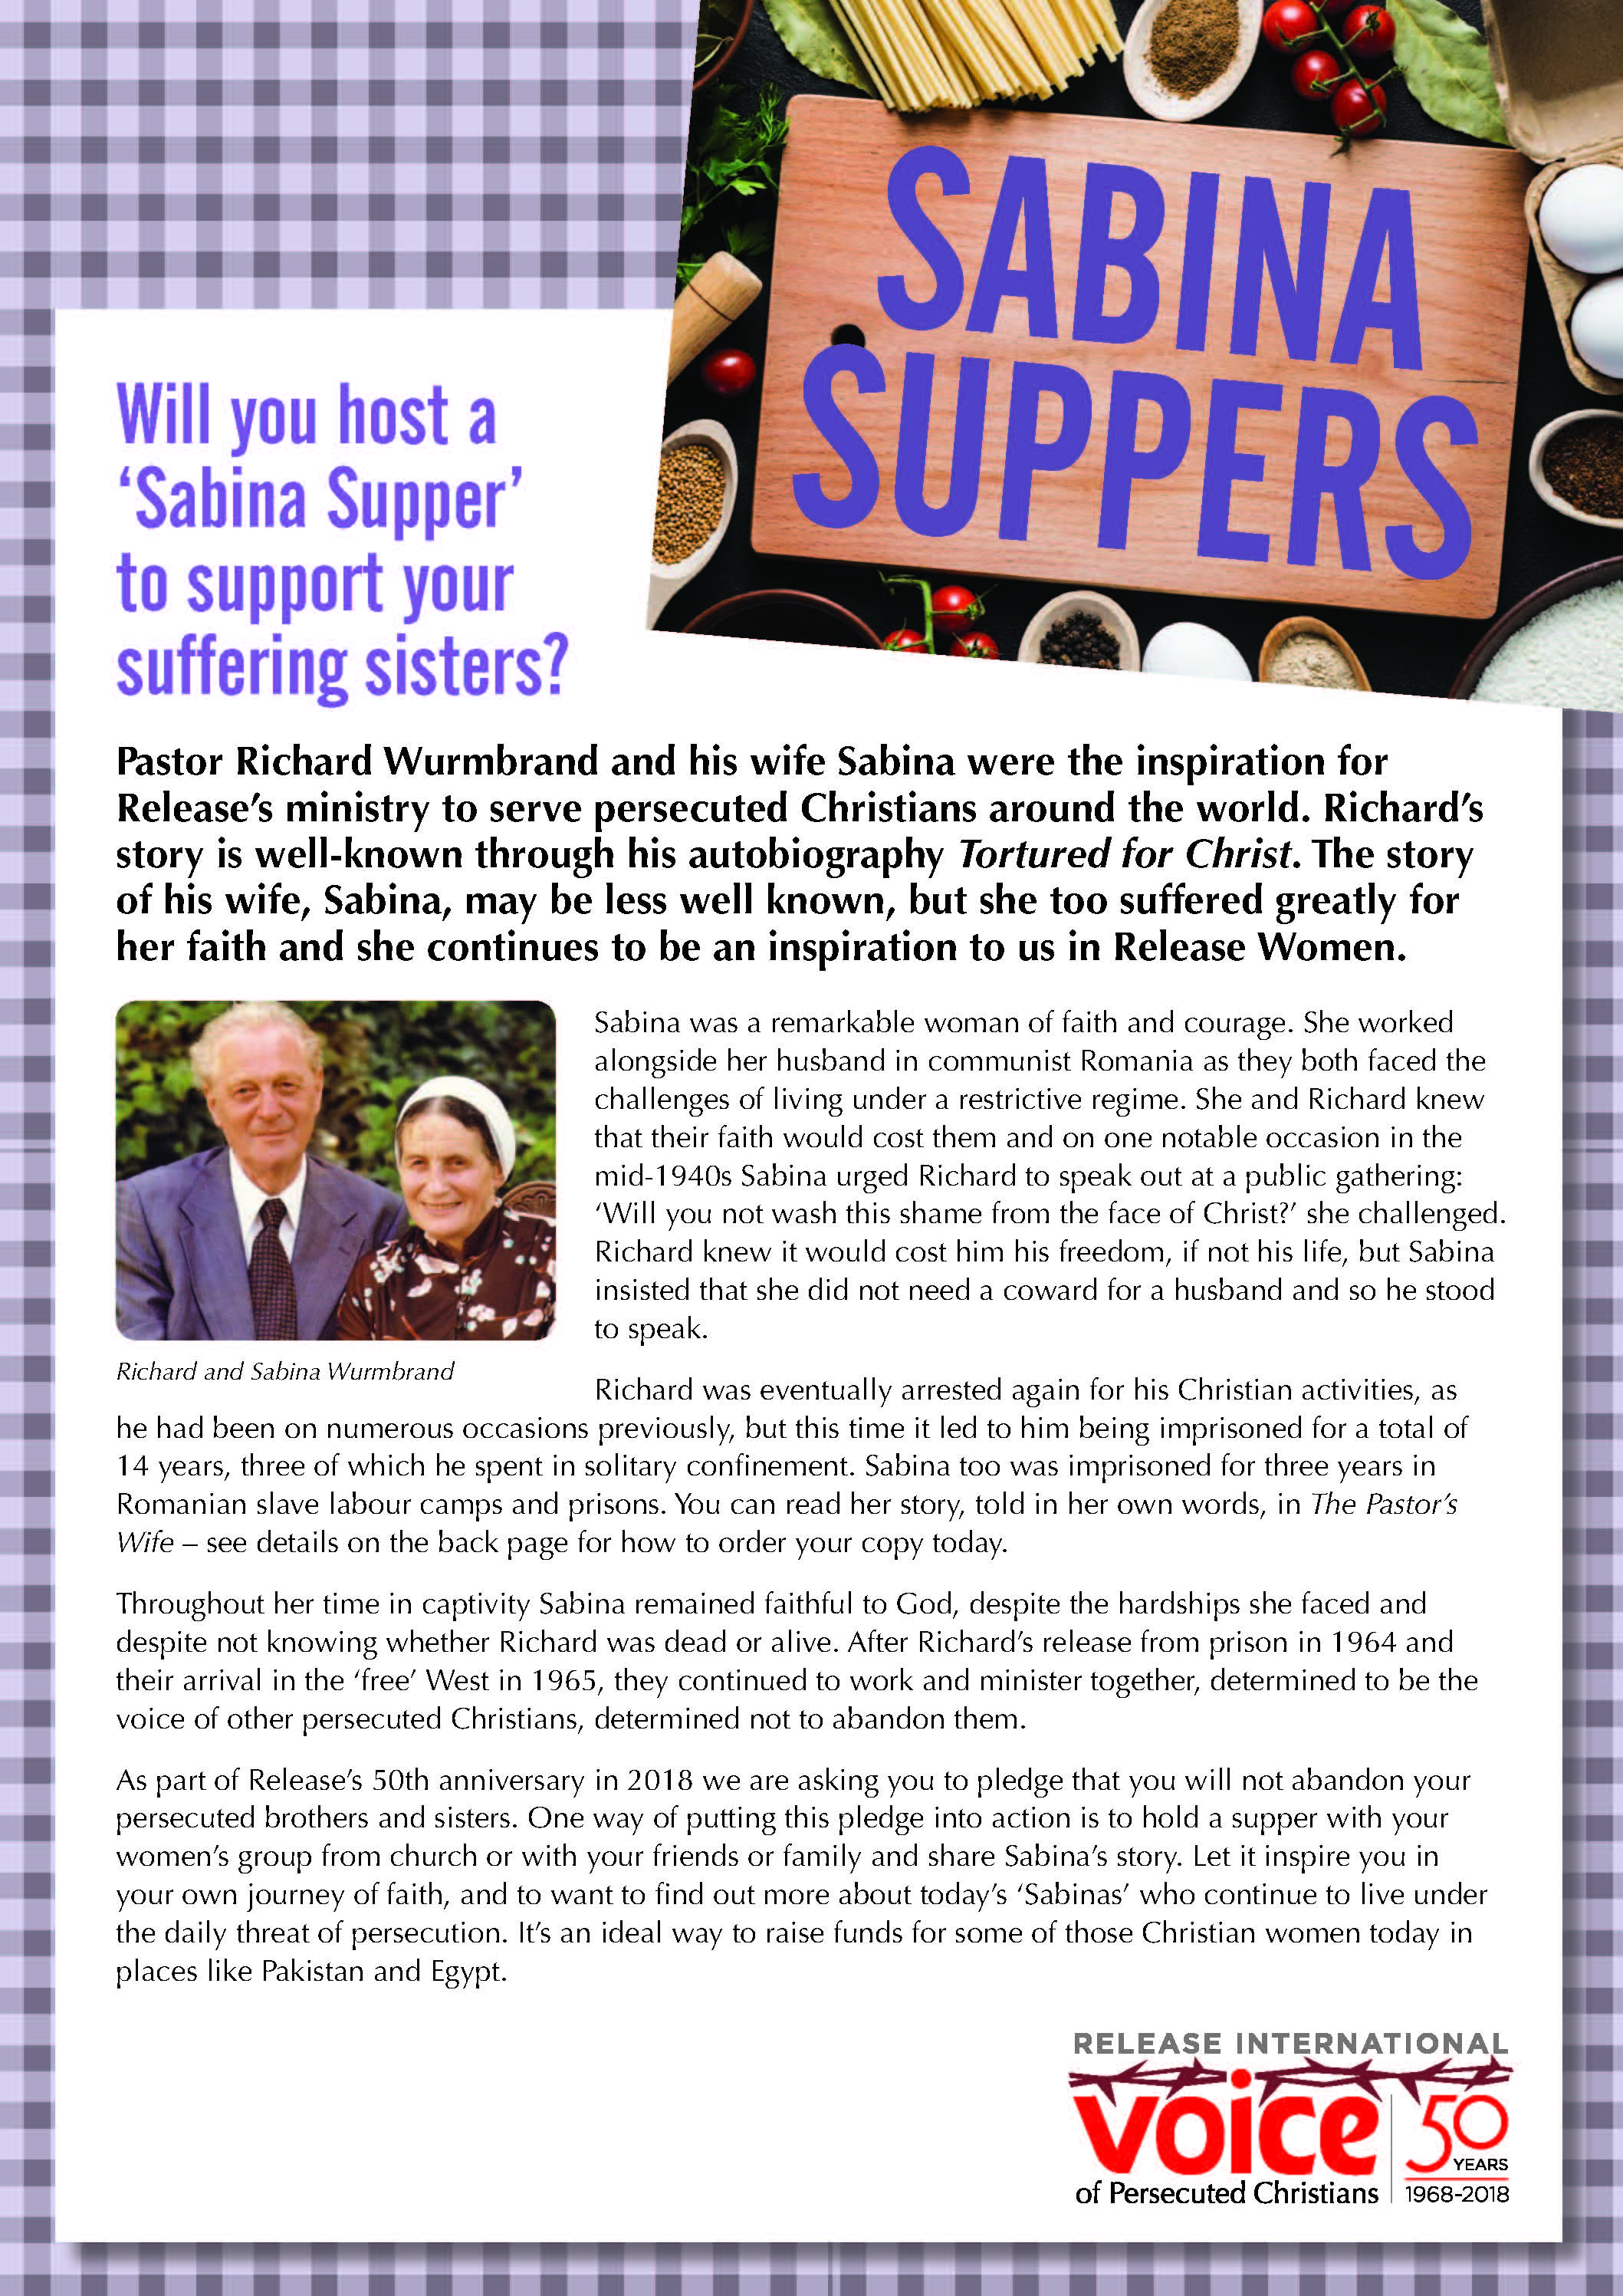 SABINA SUPPERS APR18 p1